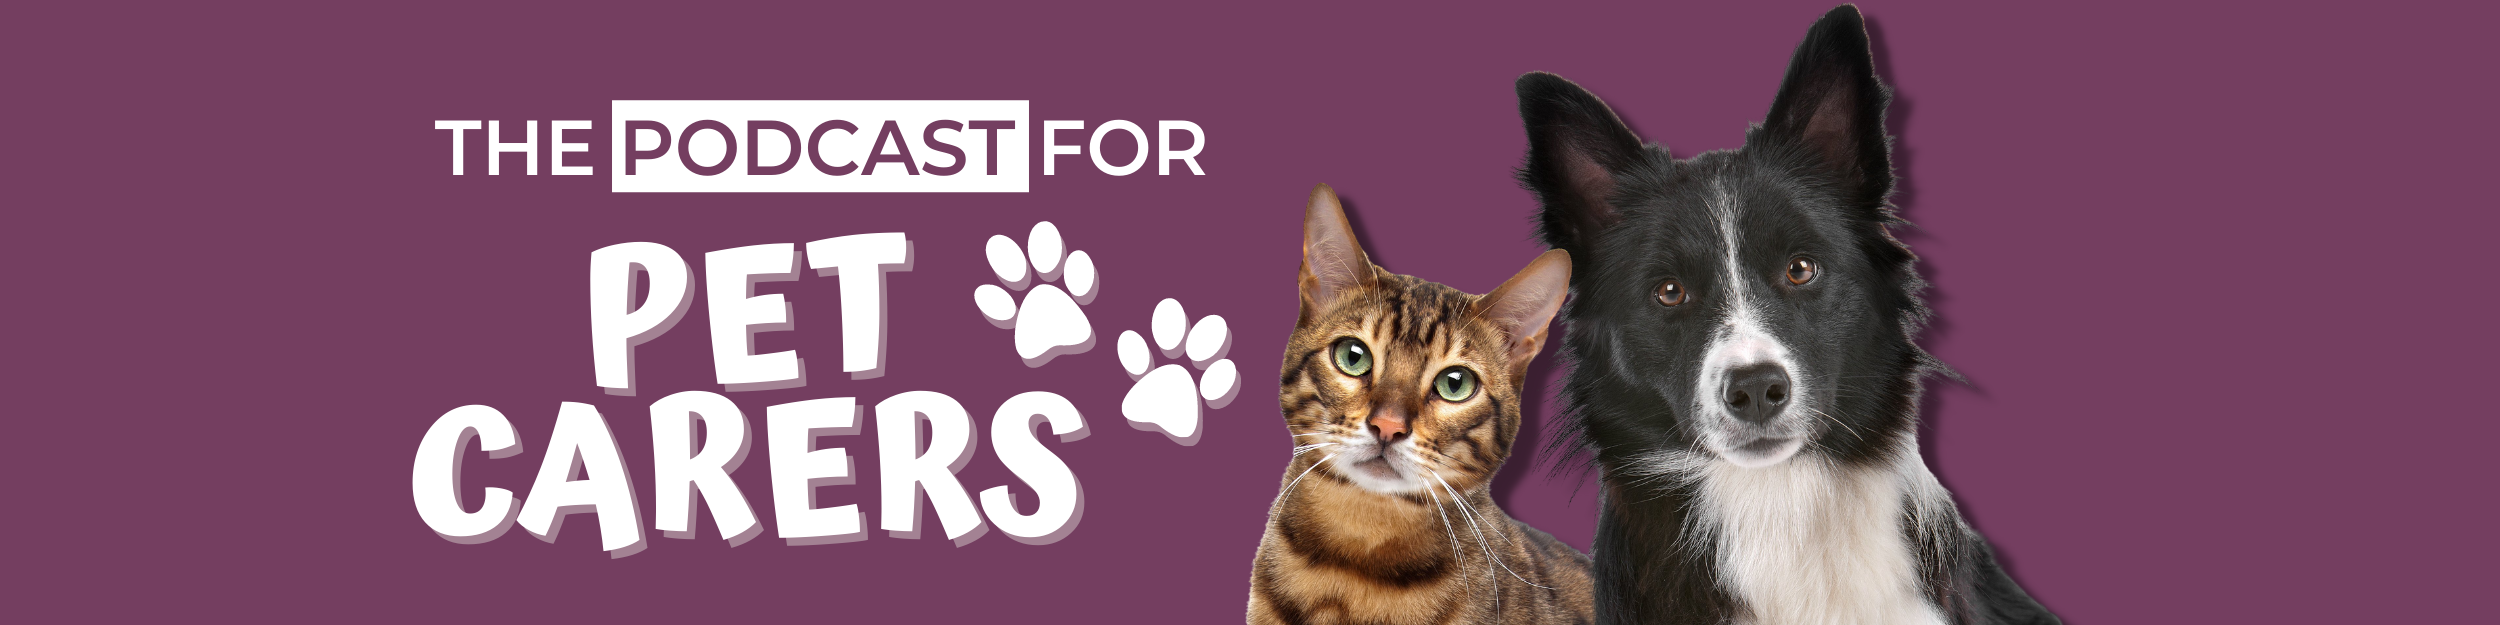 The Podcast for Pet Carers